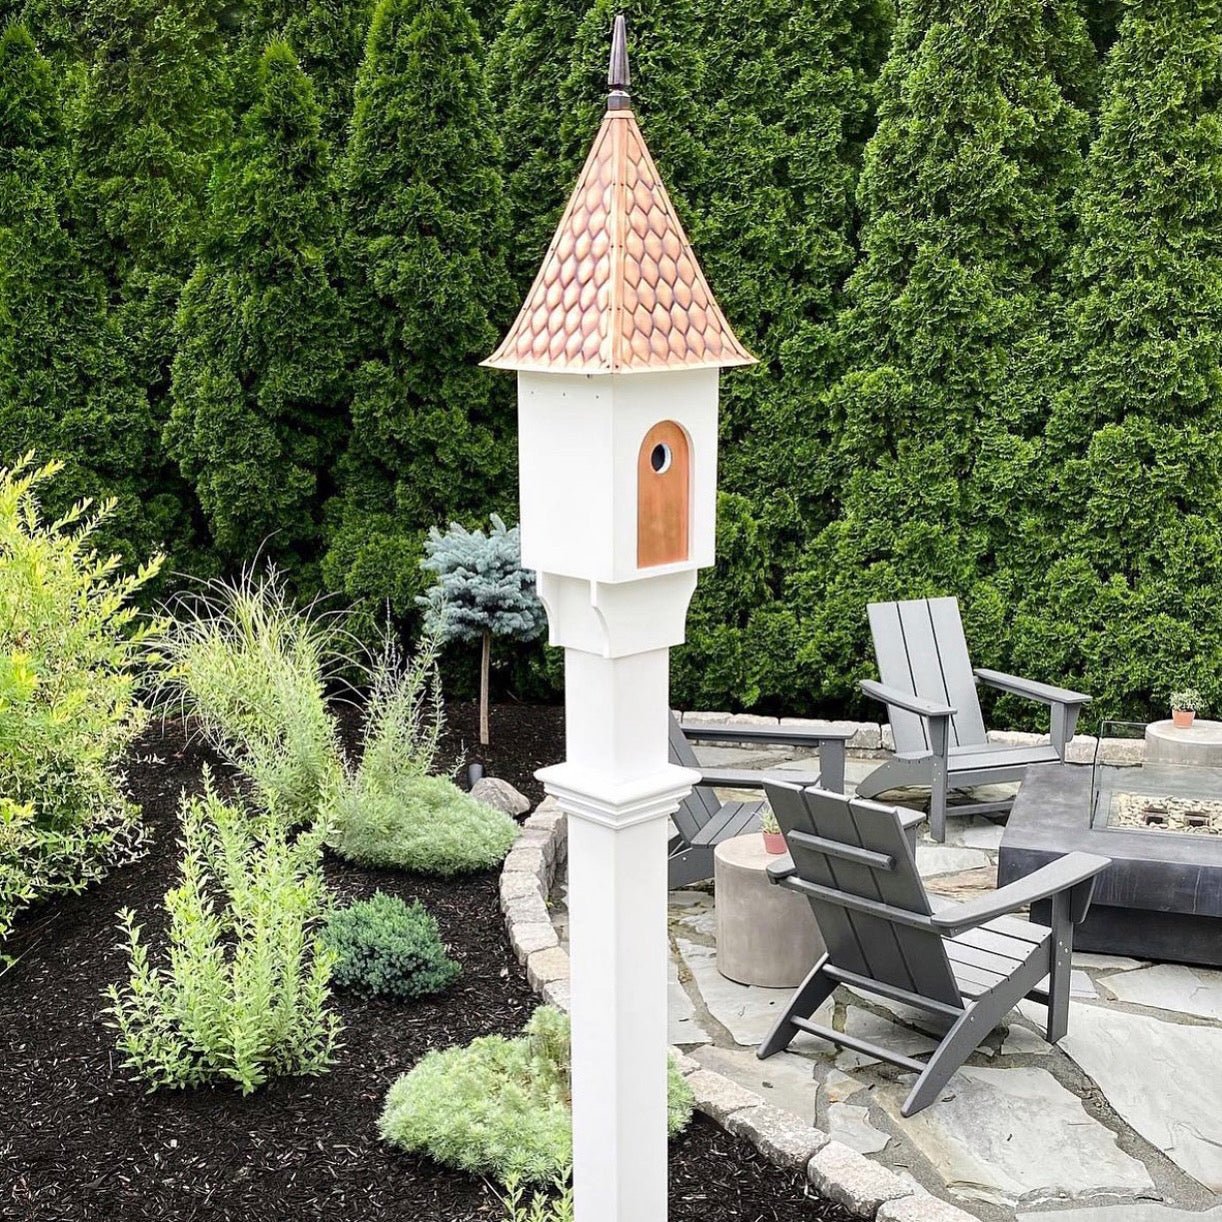 Chateau Bird House – Diamond Pattern Roof - Good Directions